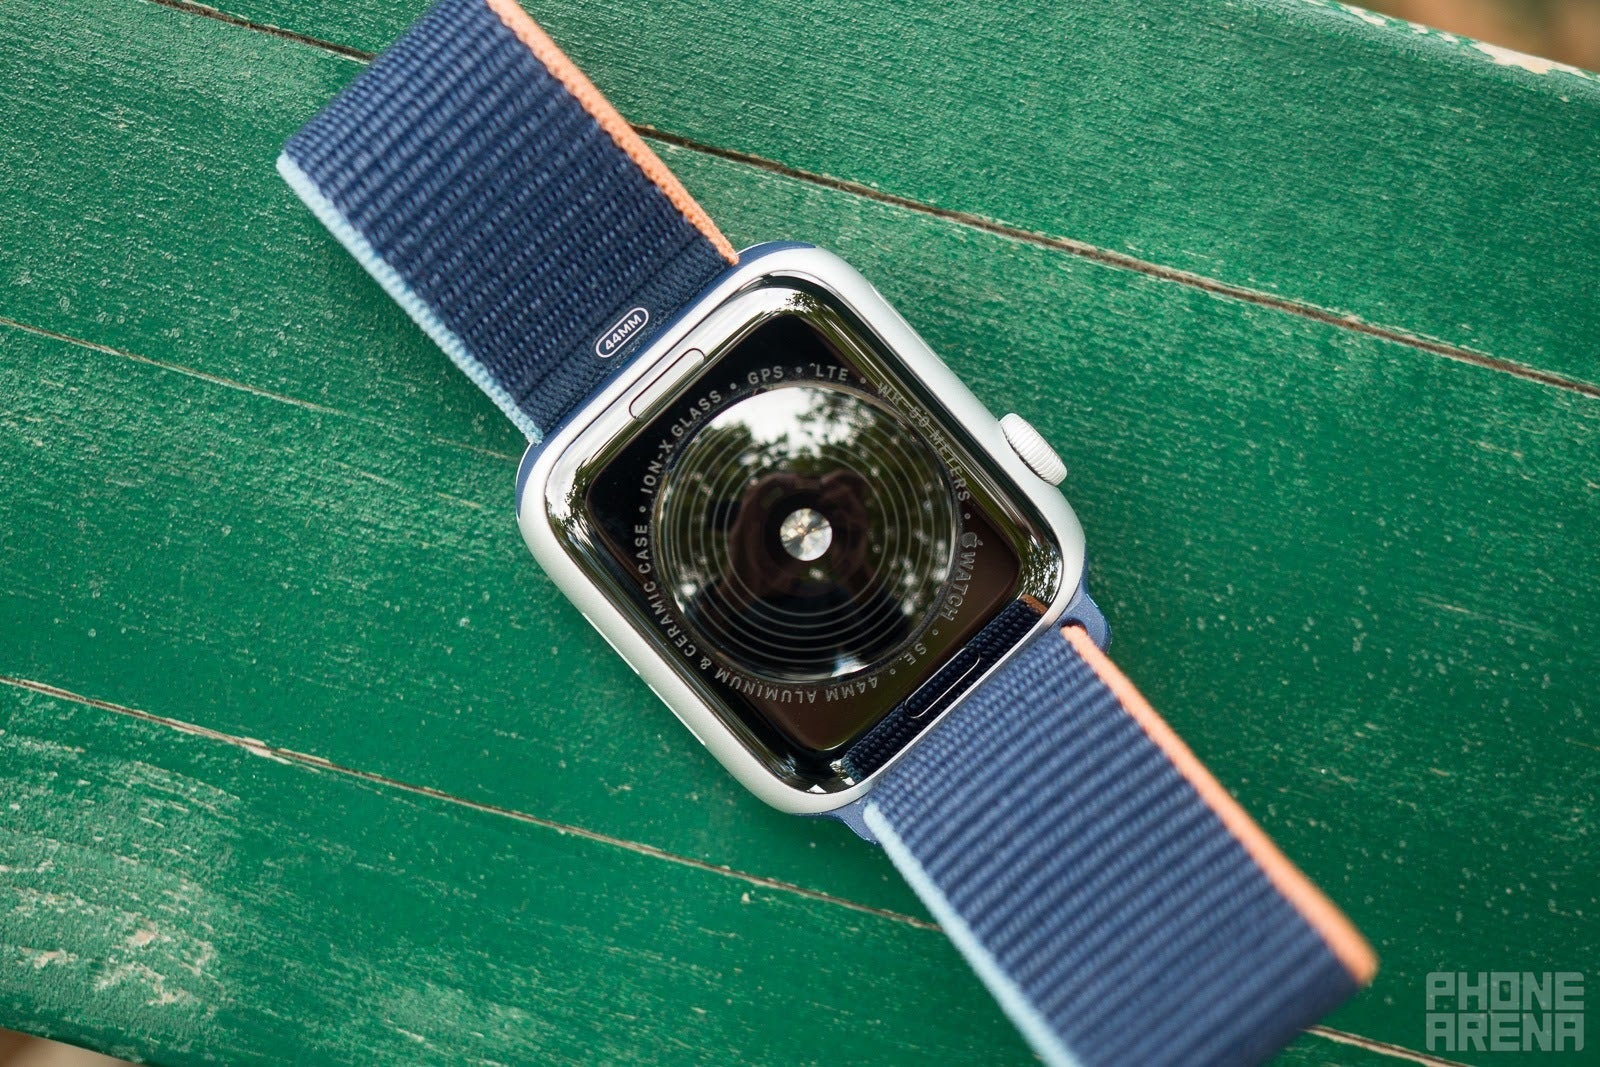 Apple Watch - 1; Burglar - 0. In a story that almost sounds like straight out of a movie